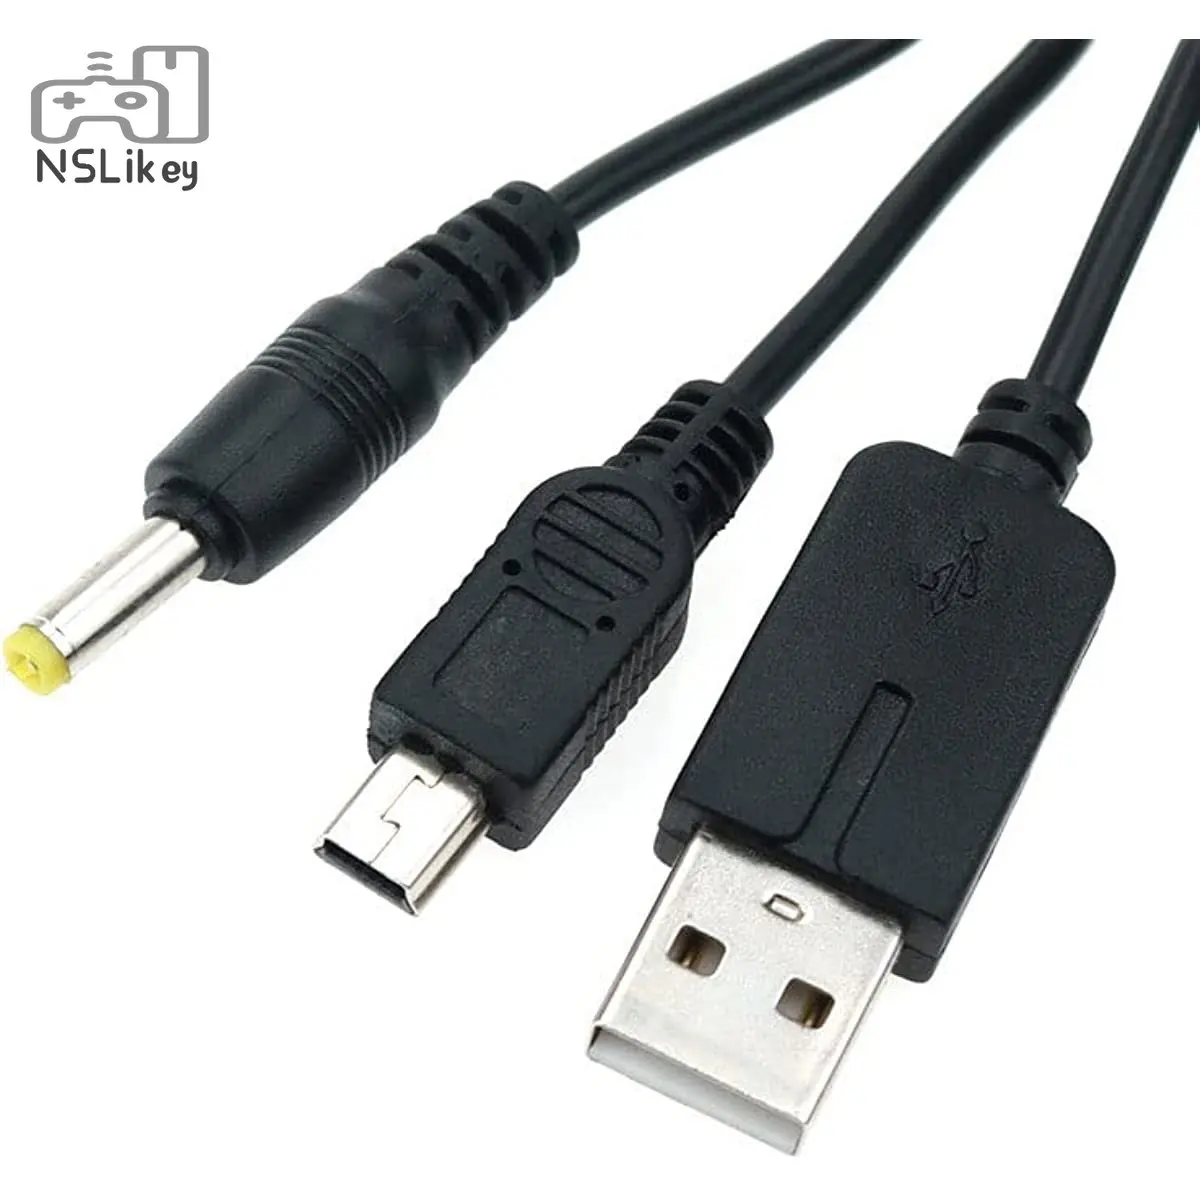 

NSLikey 2 in 1 Charger Cable Cord for PSP 1000 2000 3000 Console Charger Power Cord USB Data Charge cable